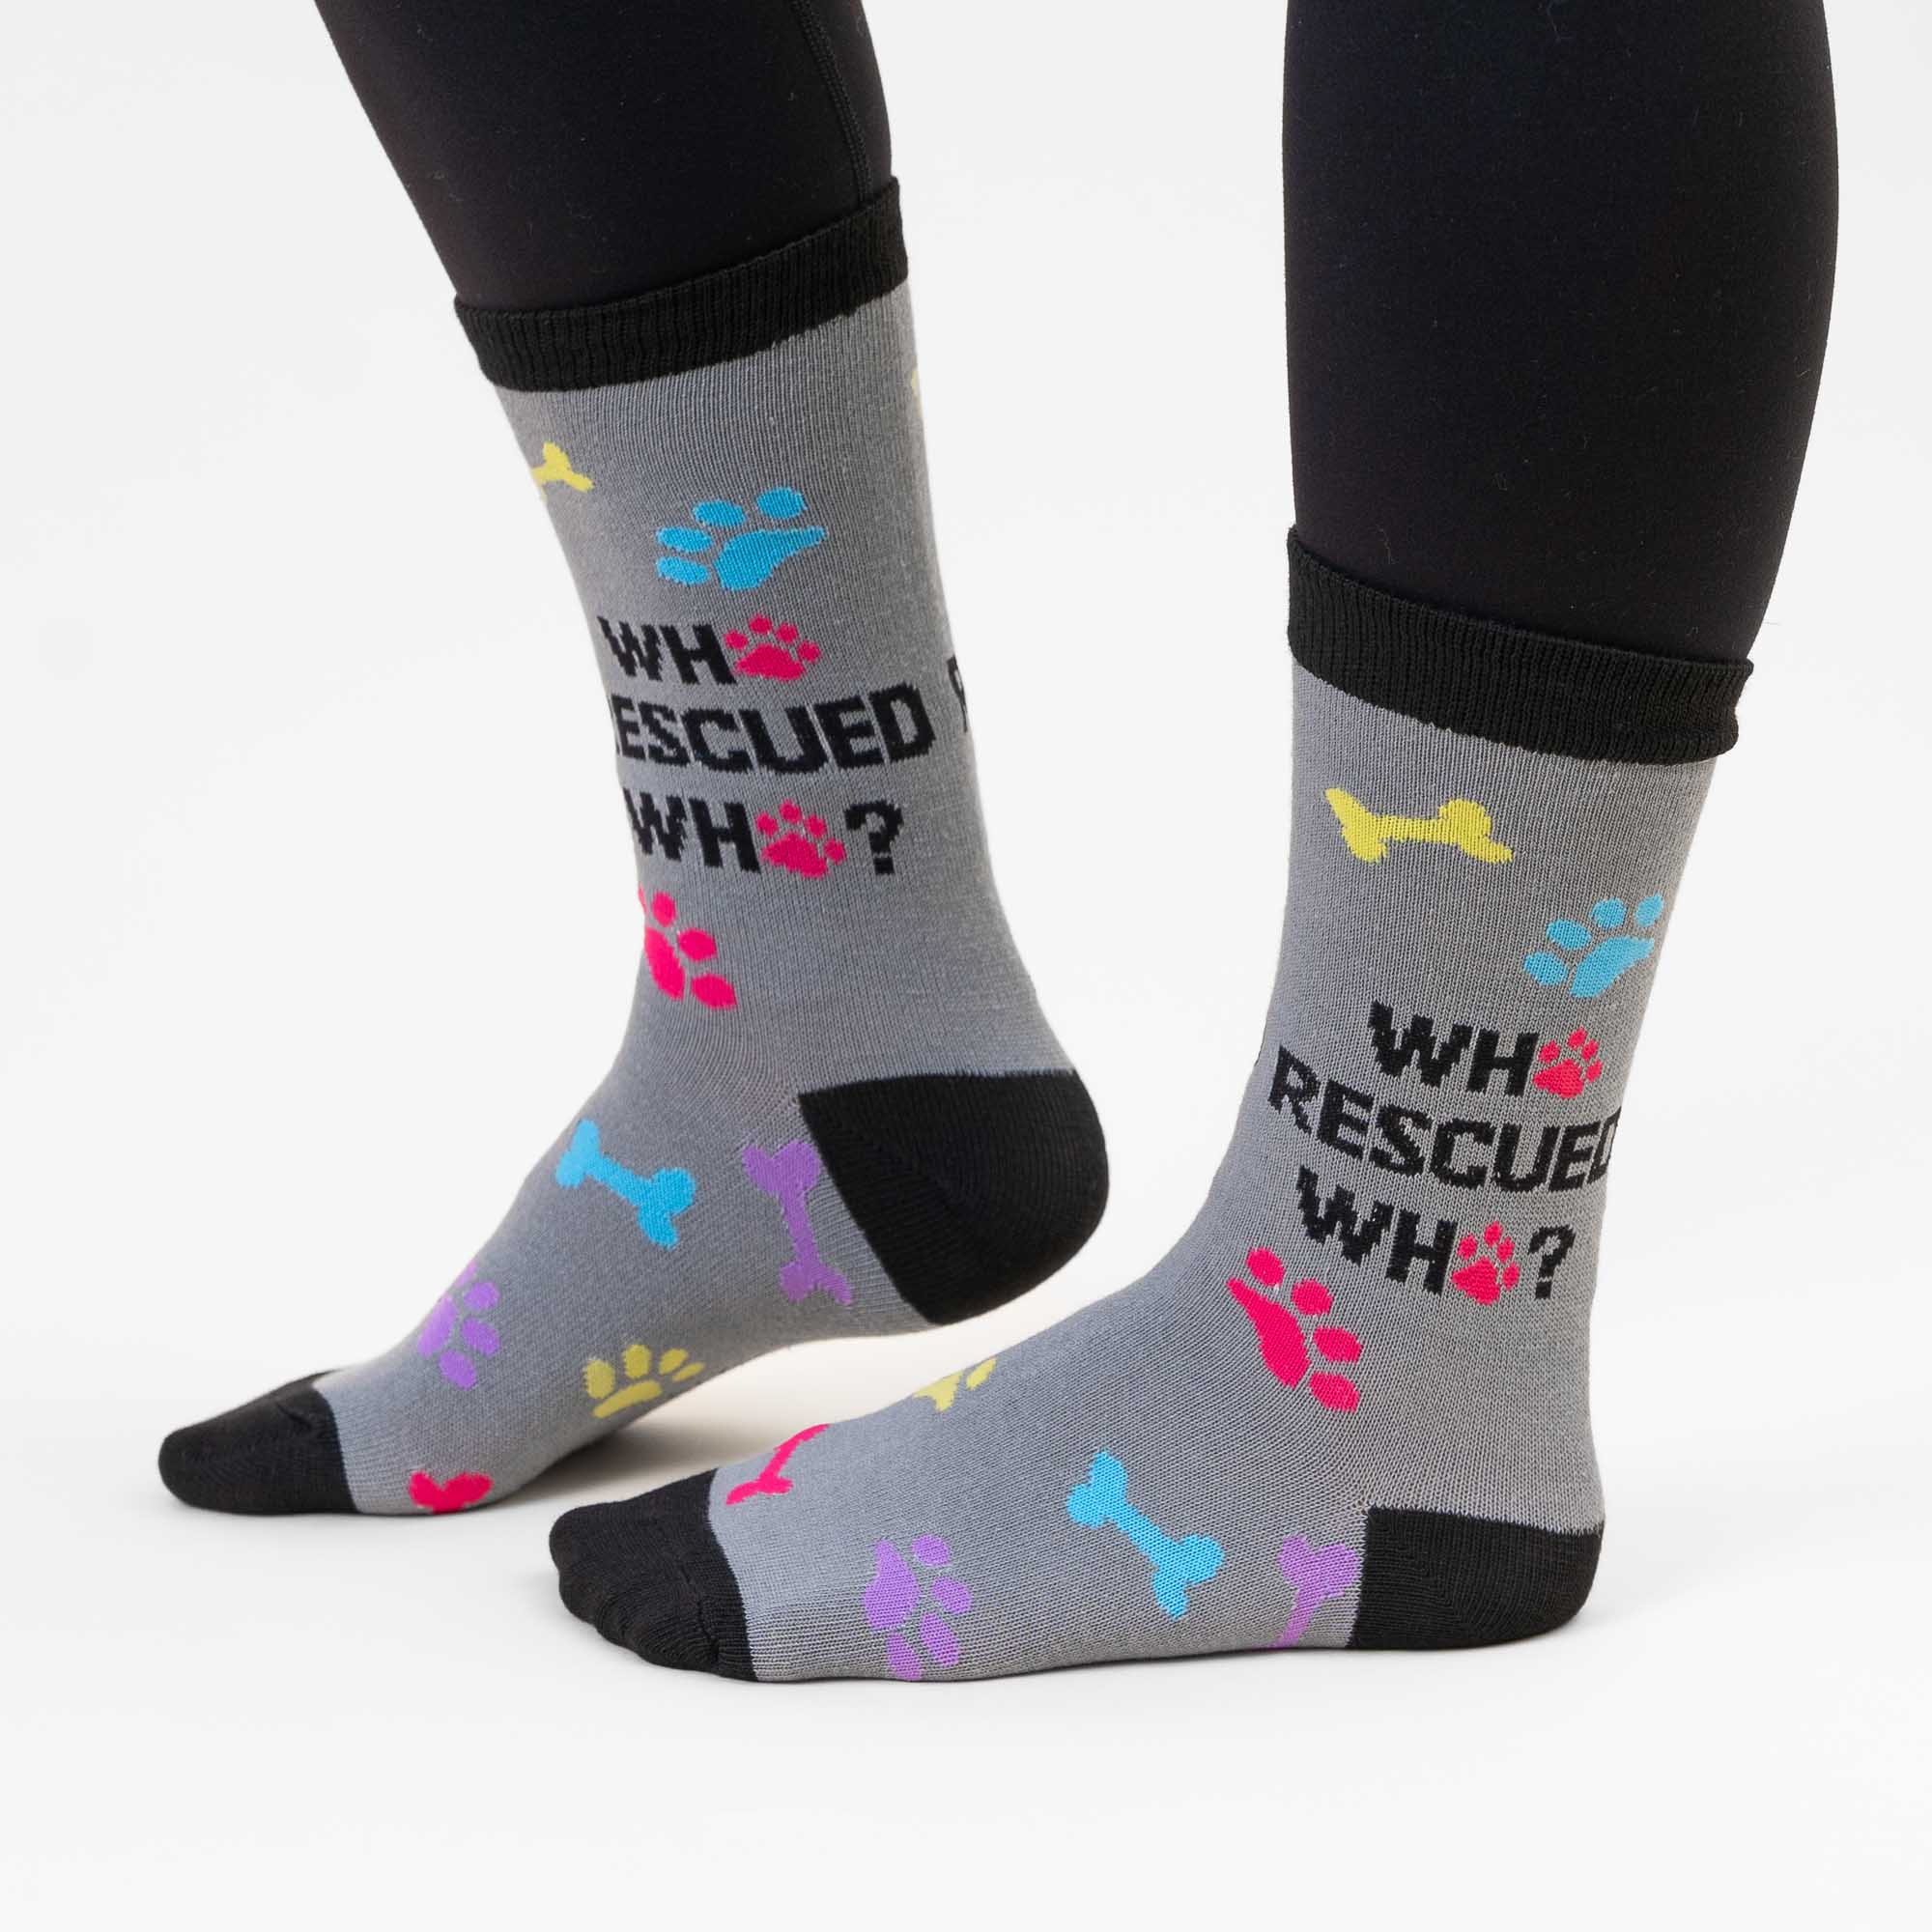 Who Rescued Who Word Sock - Gray/Turquoise  - Deal $2.92 (Limit 1 Per Customer)